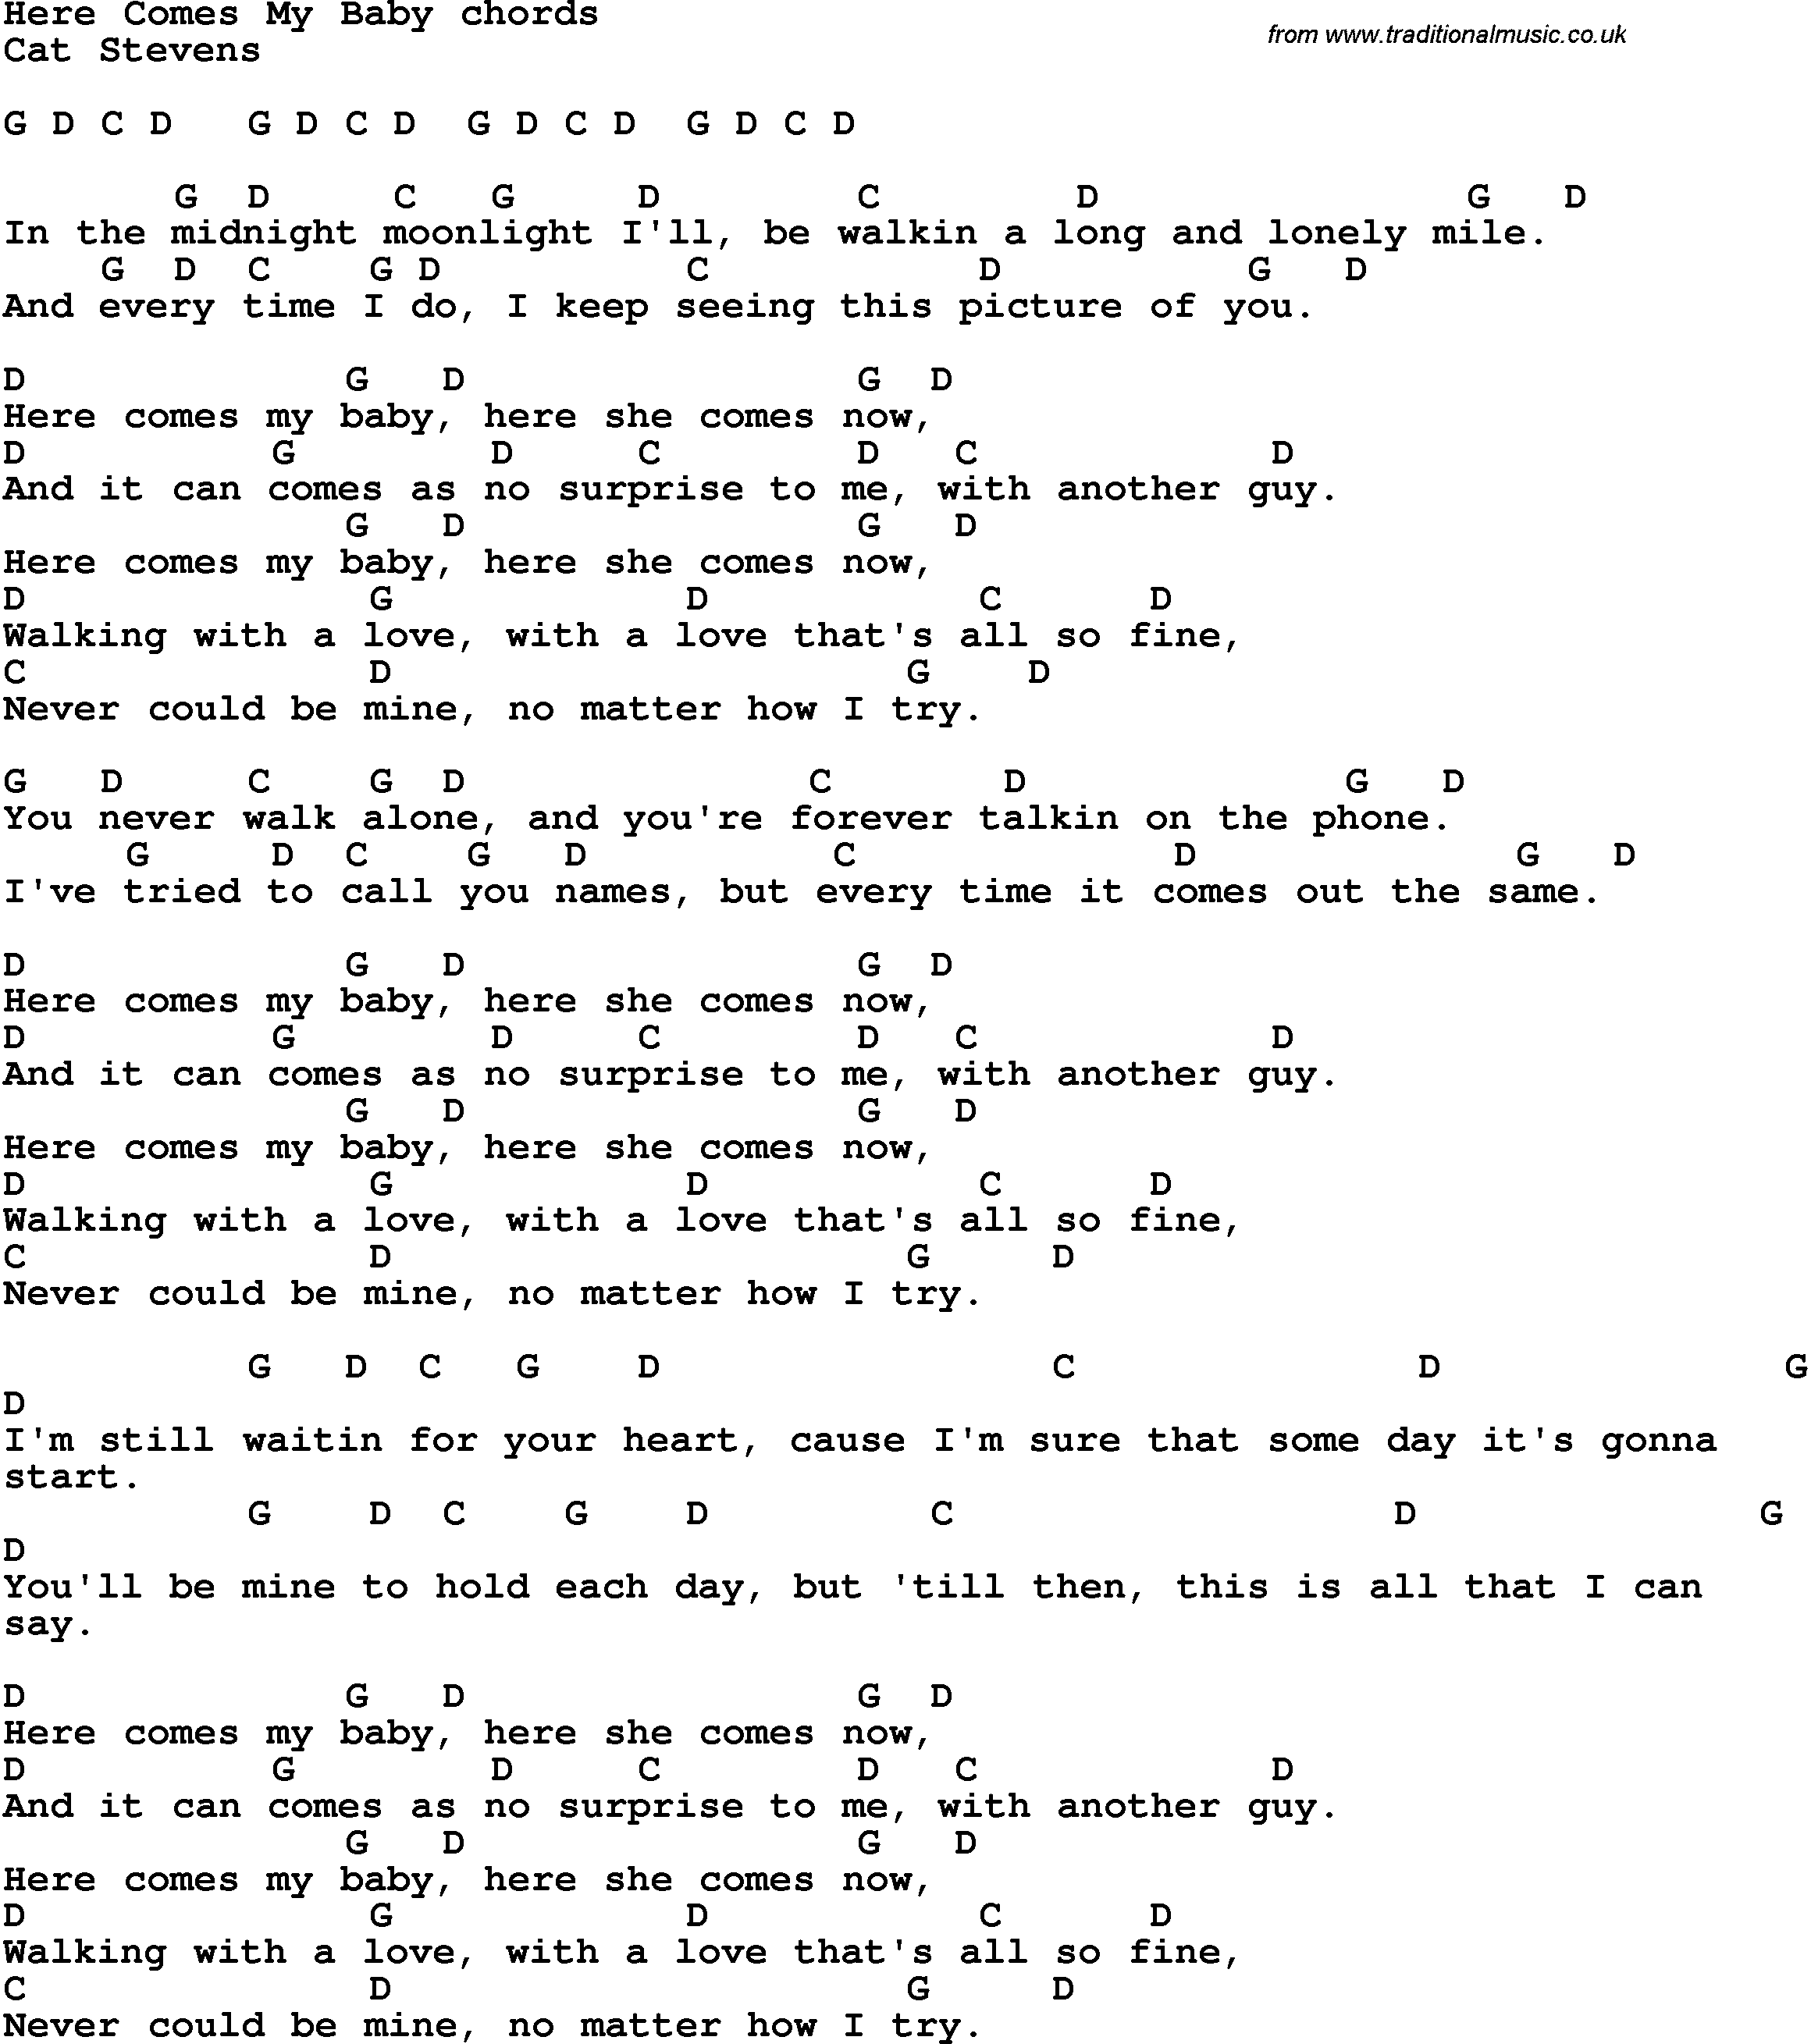 Song Lyrics with guitar chords for Here Comes My Baby